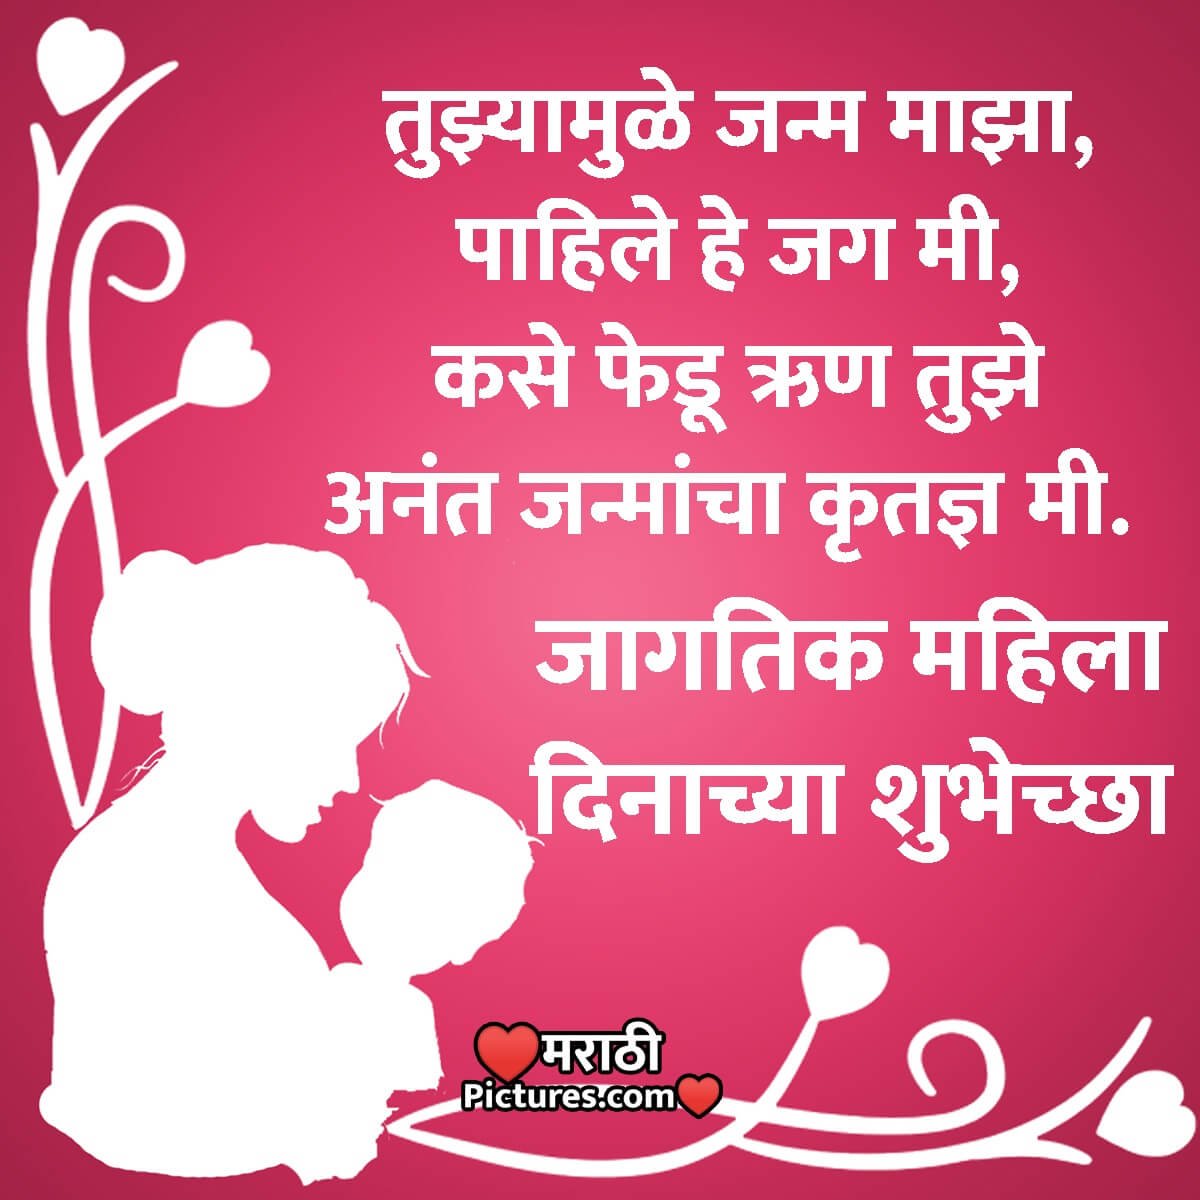 Greetings For Mother On Women’s Day In Marathi